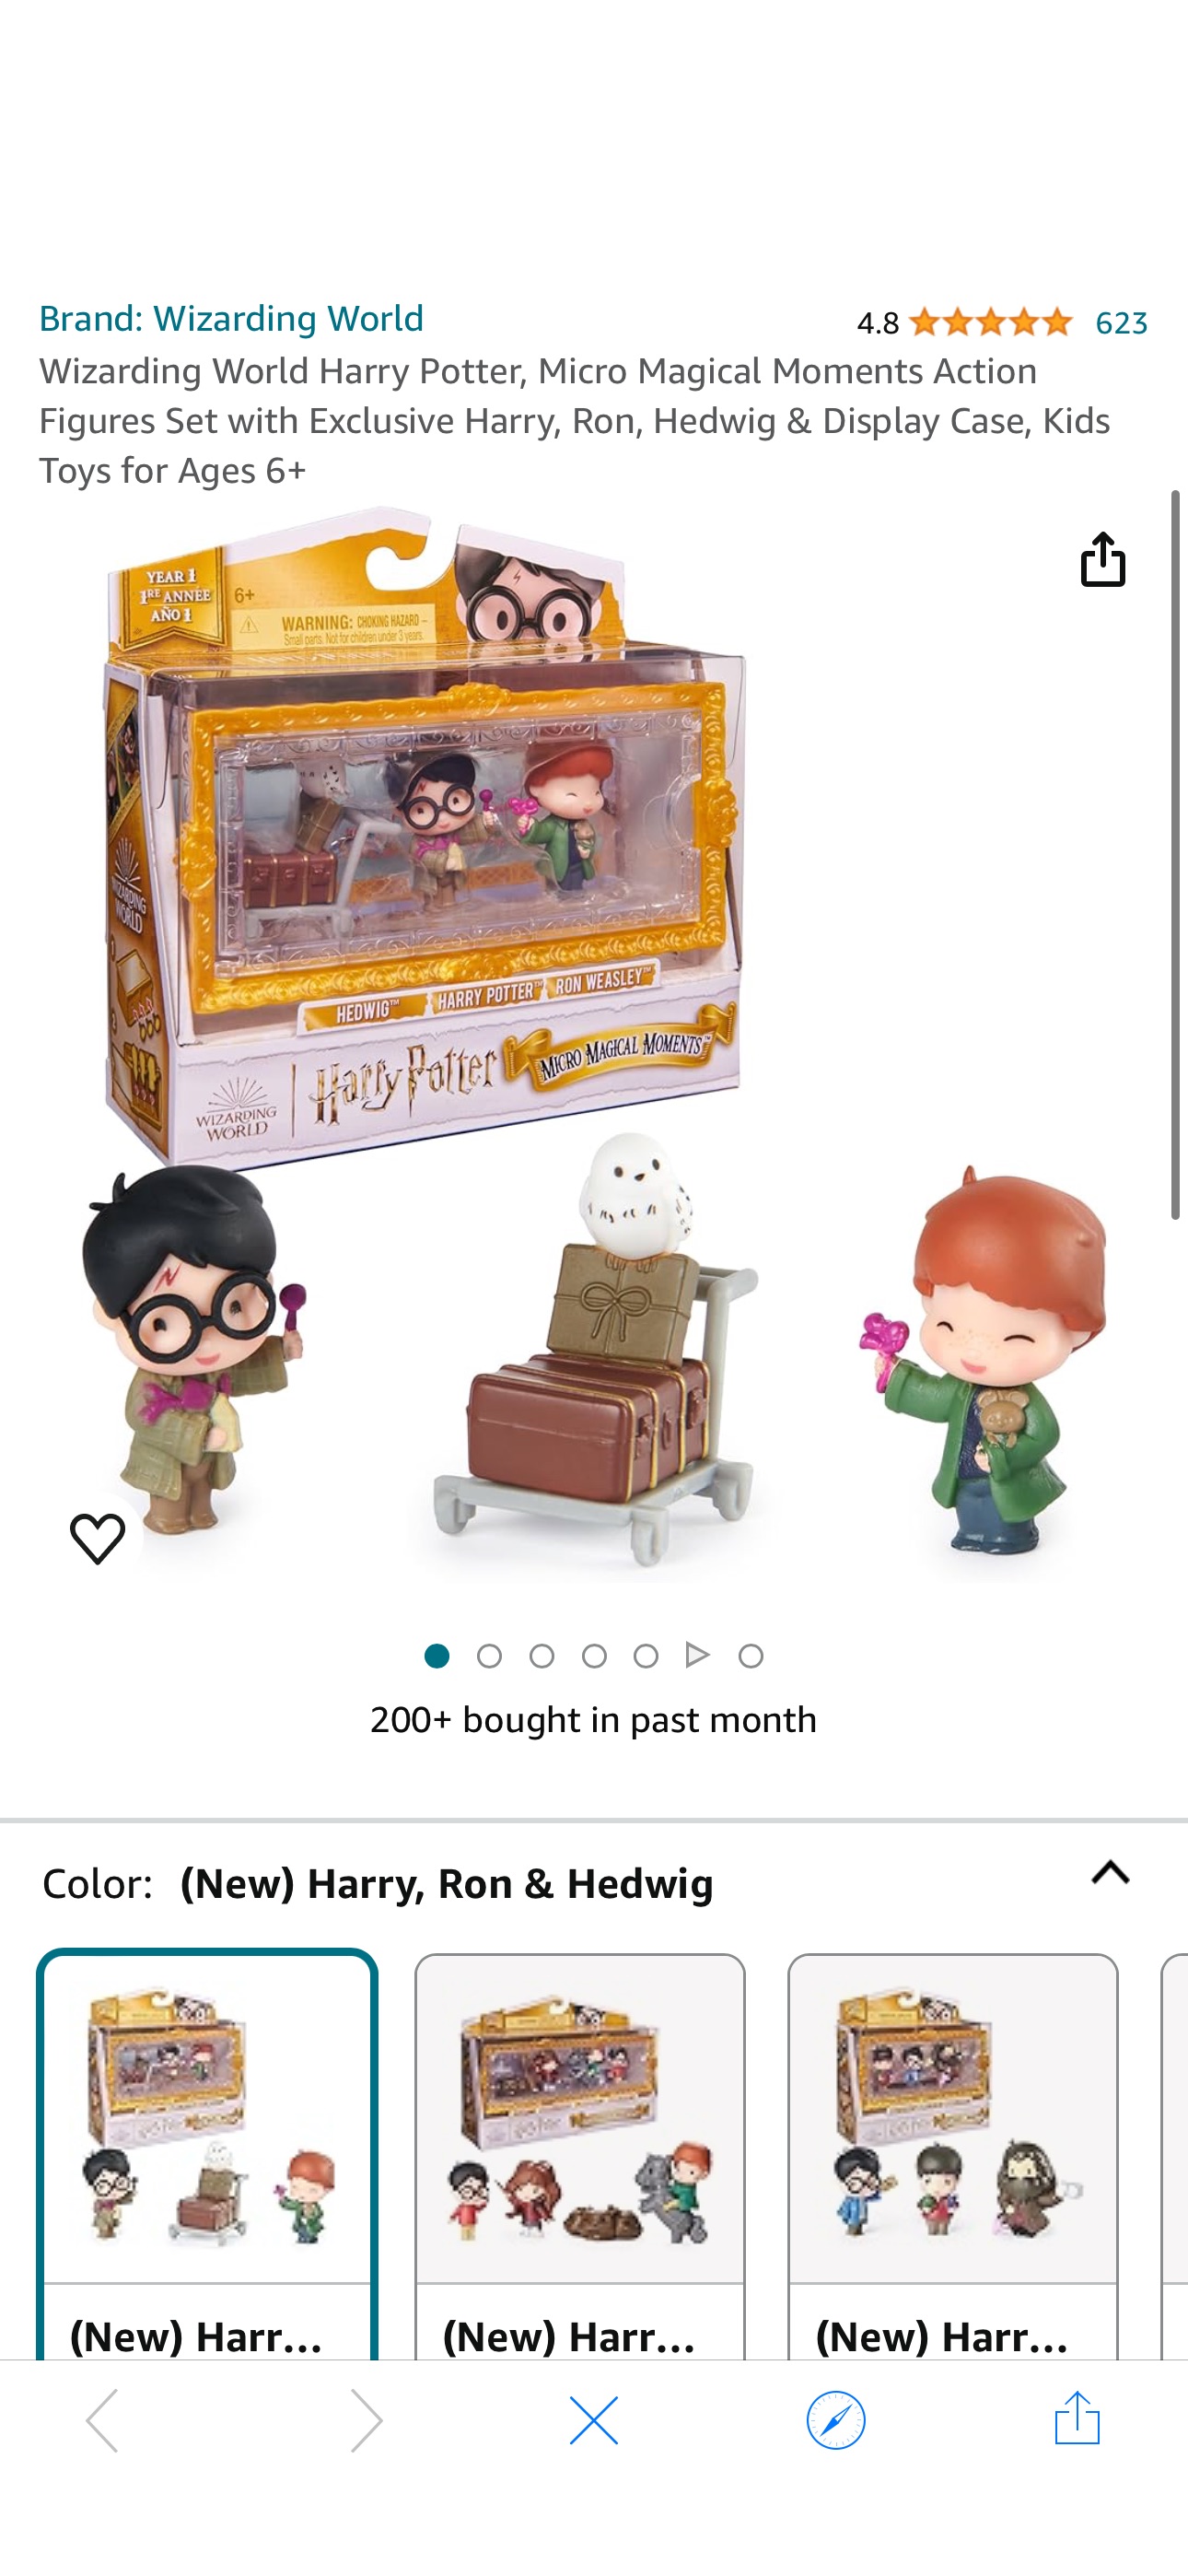 Amazon.com: Wizarding World Harry Potter, Micro Magical Moments Action Figures Set with Exclusive Harry, Ron, Hedwig & Display Case, Kids Toys for Ages 6+ : Toys & Games